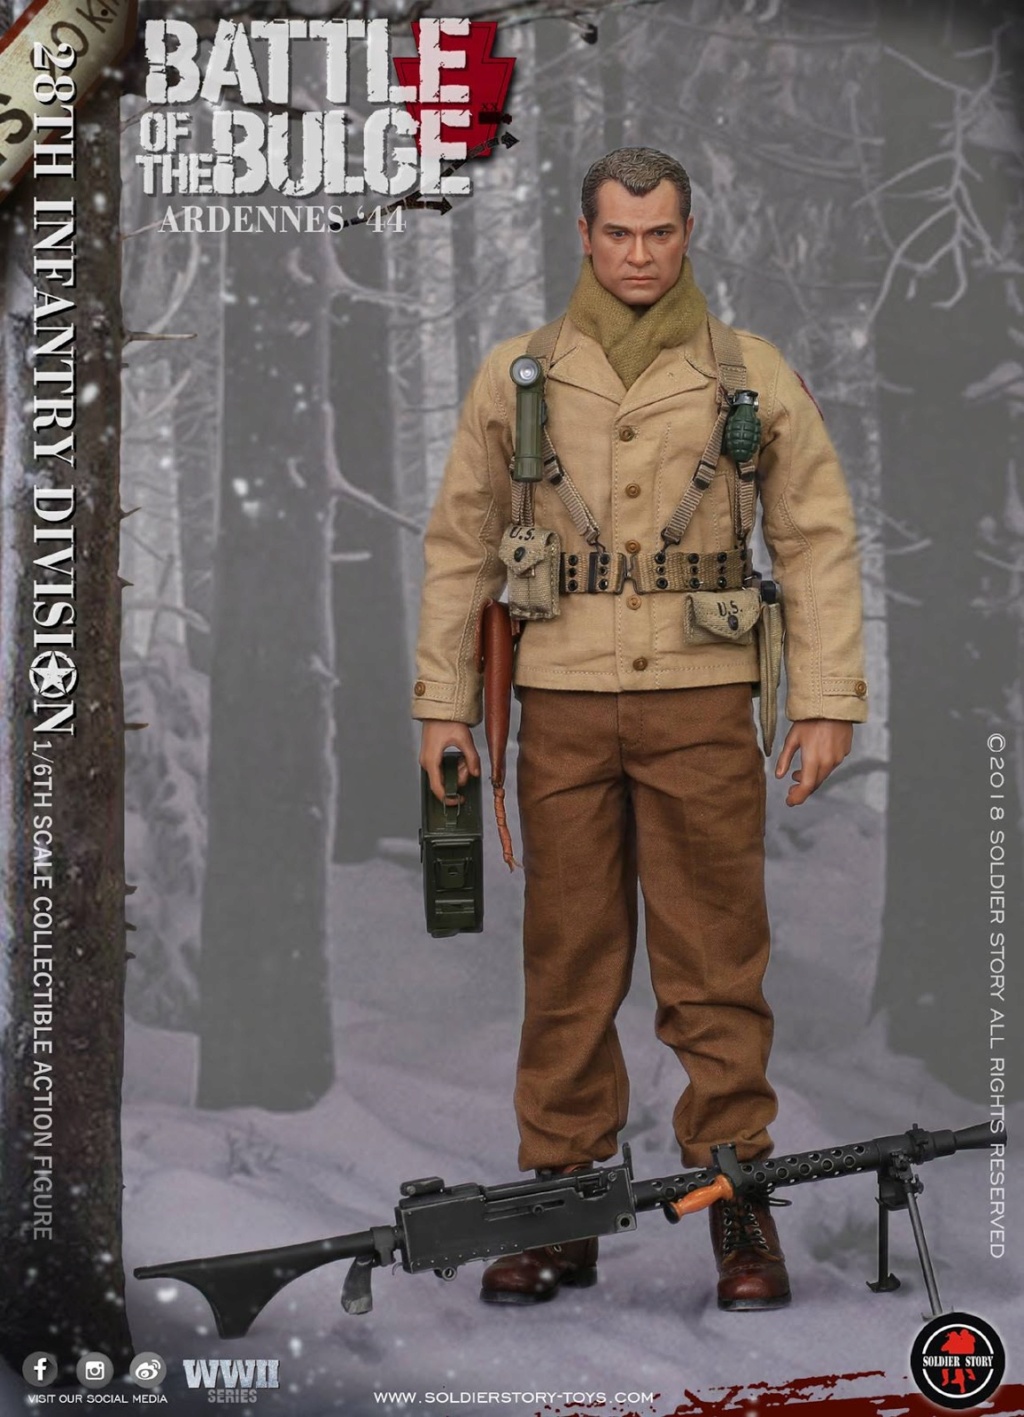 WWII - NEW PRODUCT: Soldier Story: 1/6 scale U.S. Army 28th Infantry Division Ardennes 1944 Bulge112